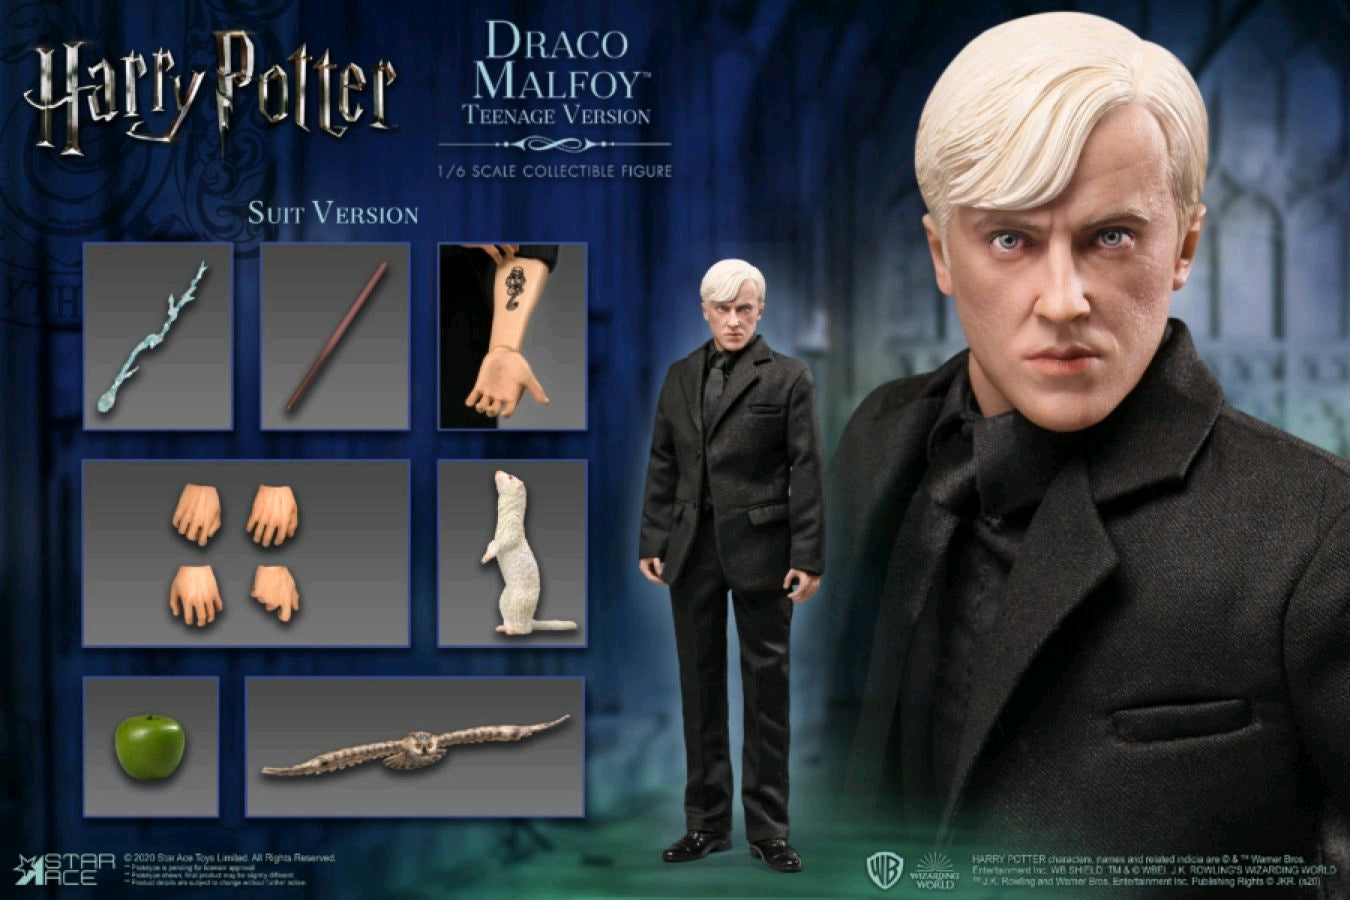 Harry Potter - Draco Malfoy Teenager Suit 1:6 Scale 12" Action Figure - Ozzie Collectables